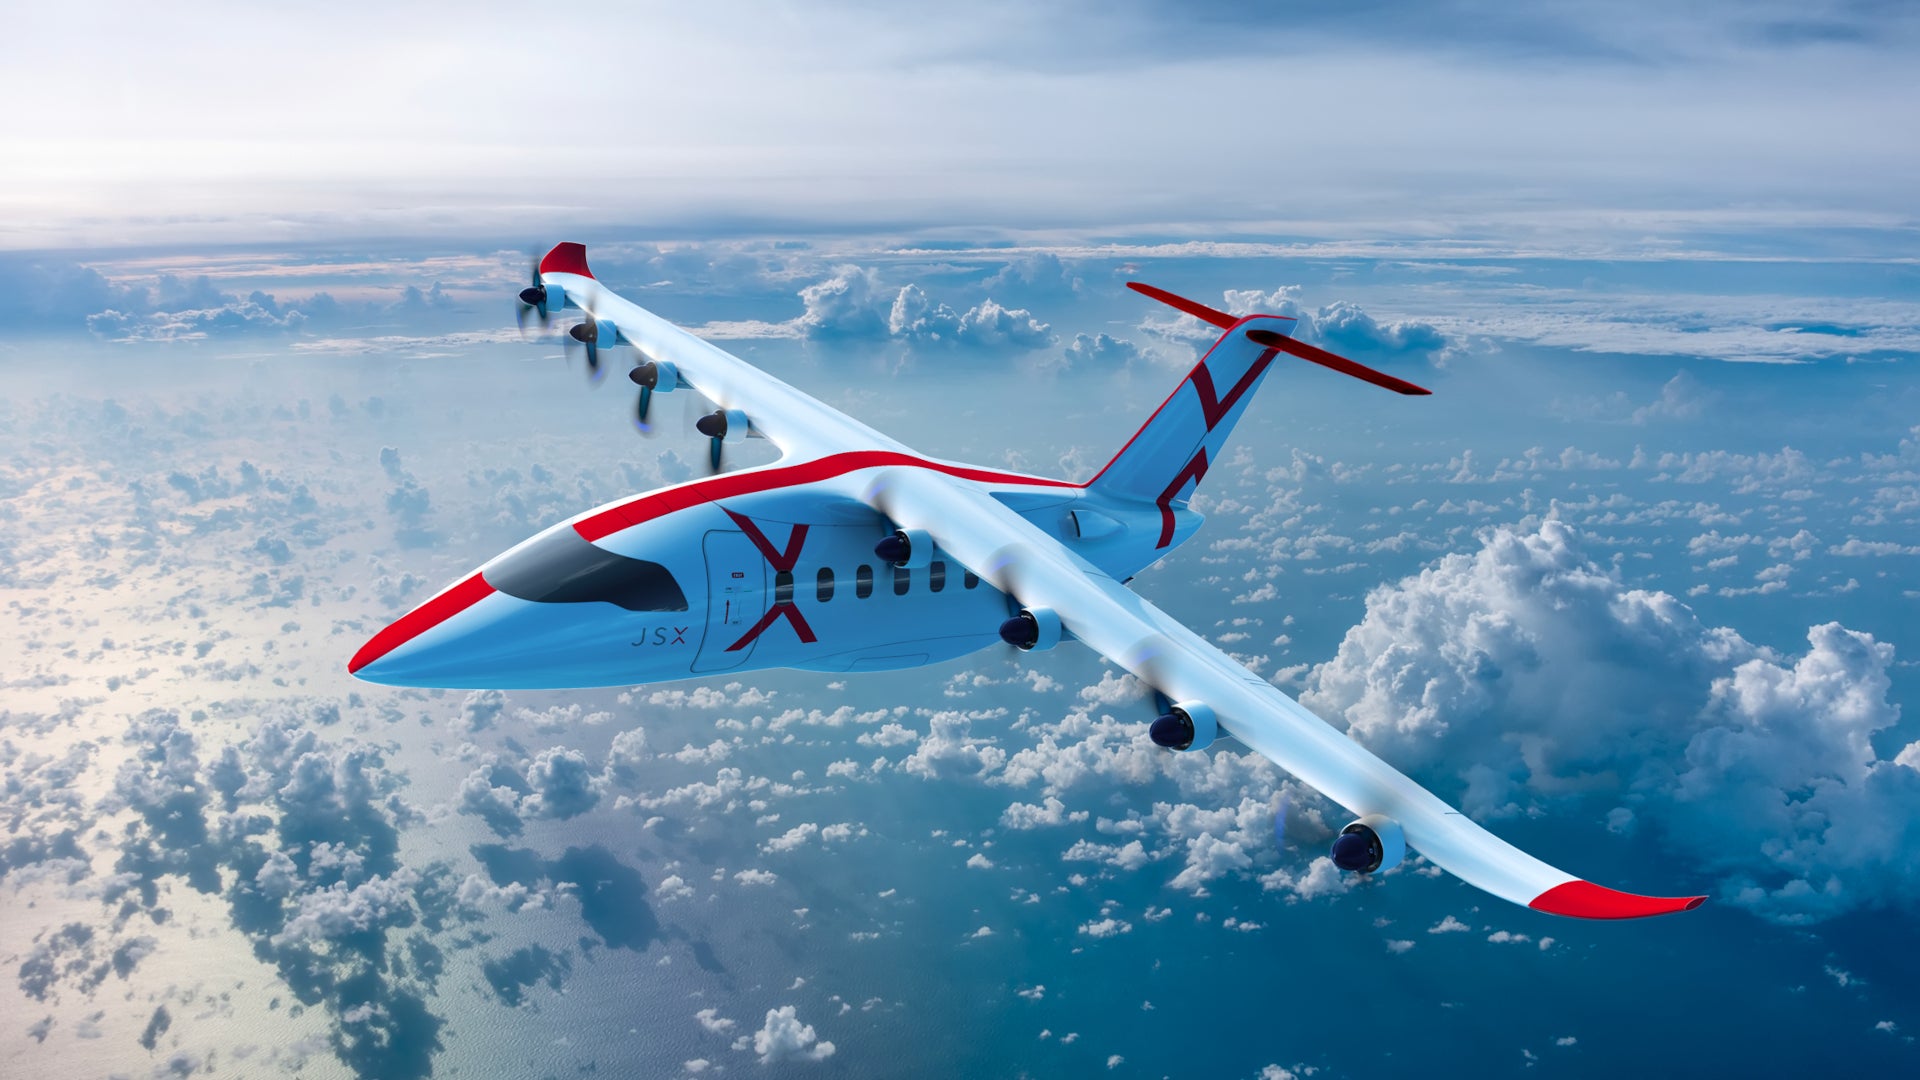 Regional Air Carrier JSX to Purchase More Than 330 Hybrid-Electric Aircraft